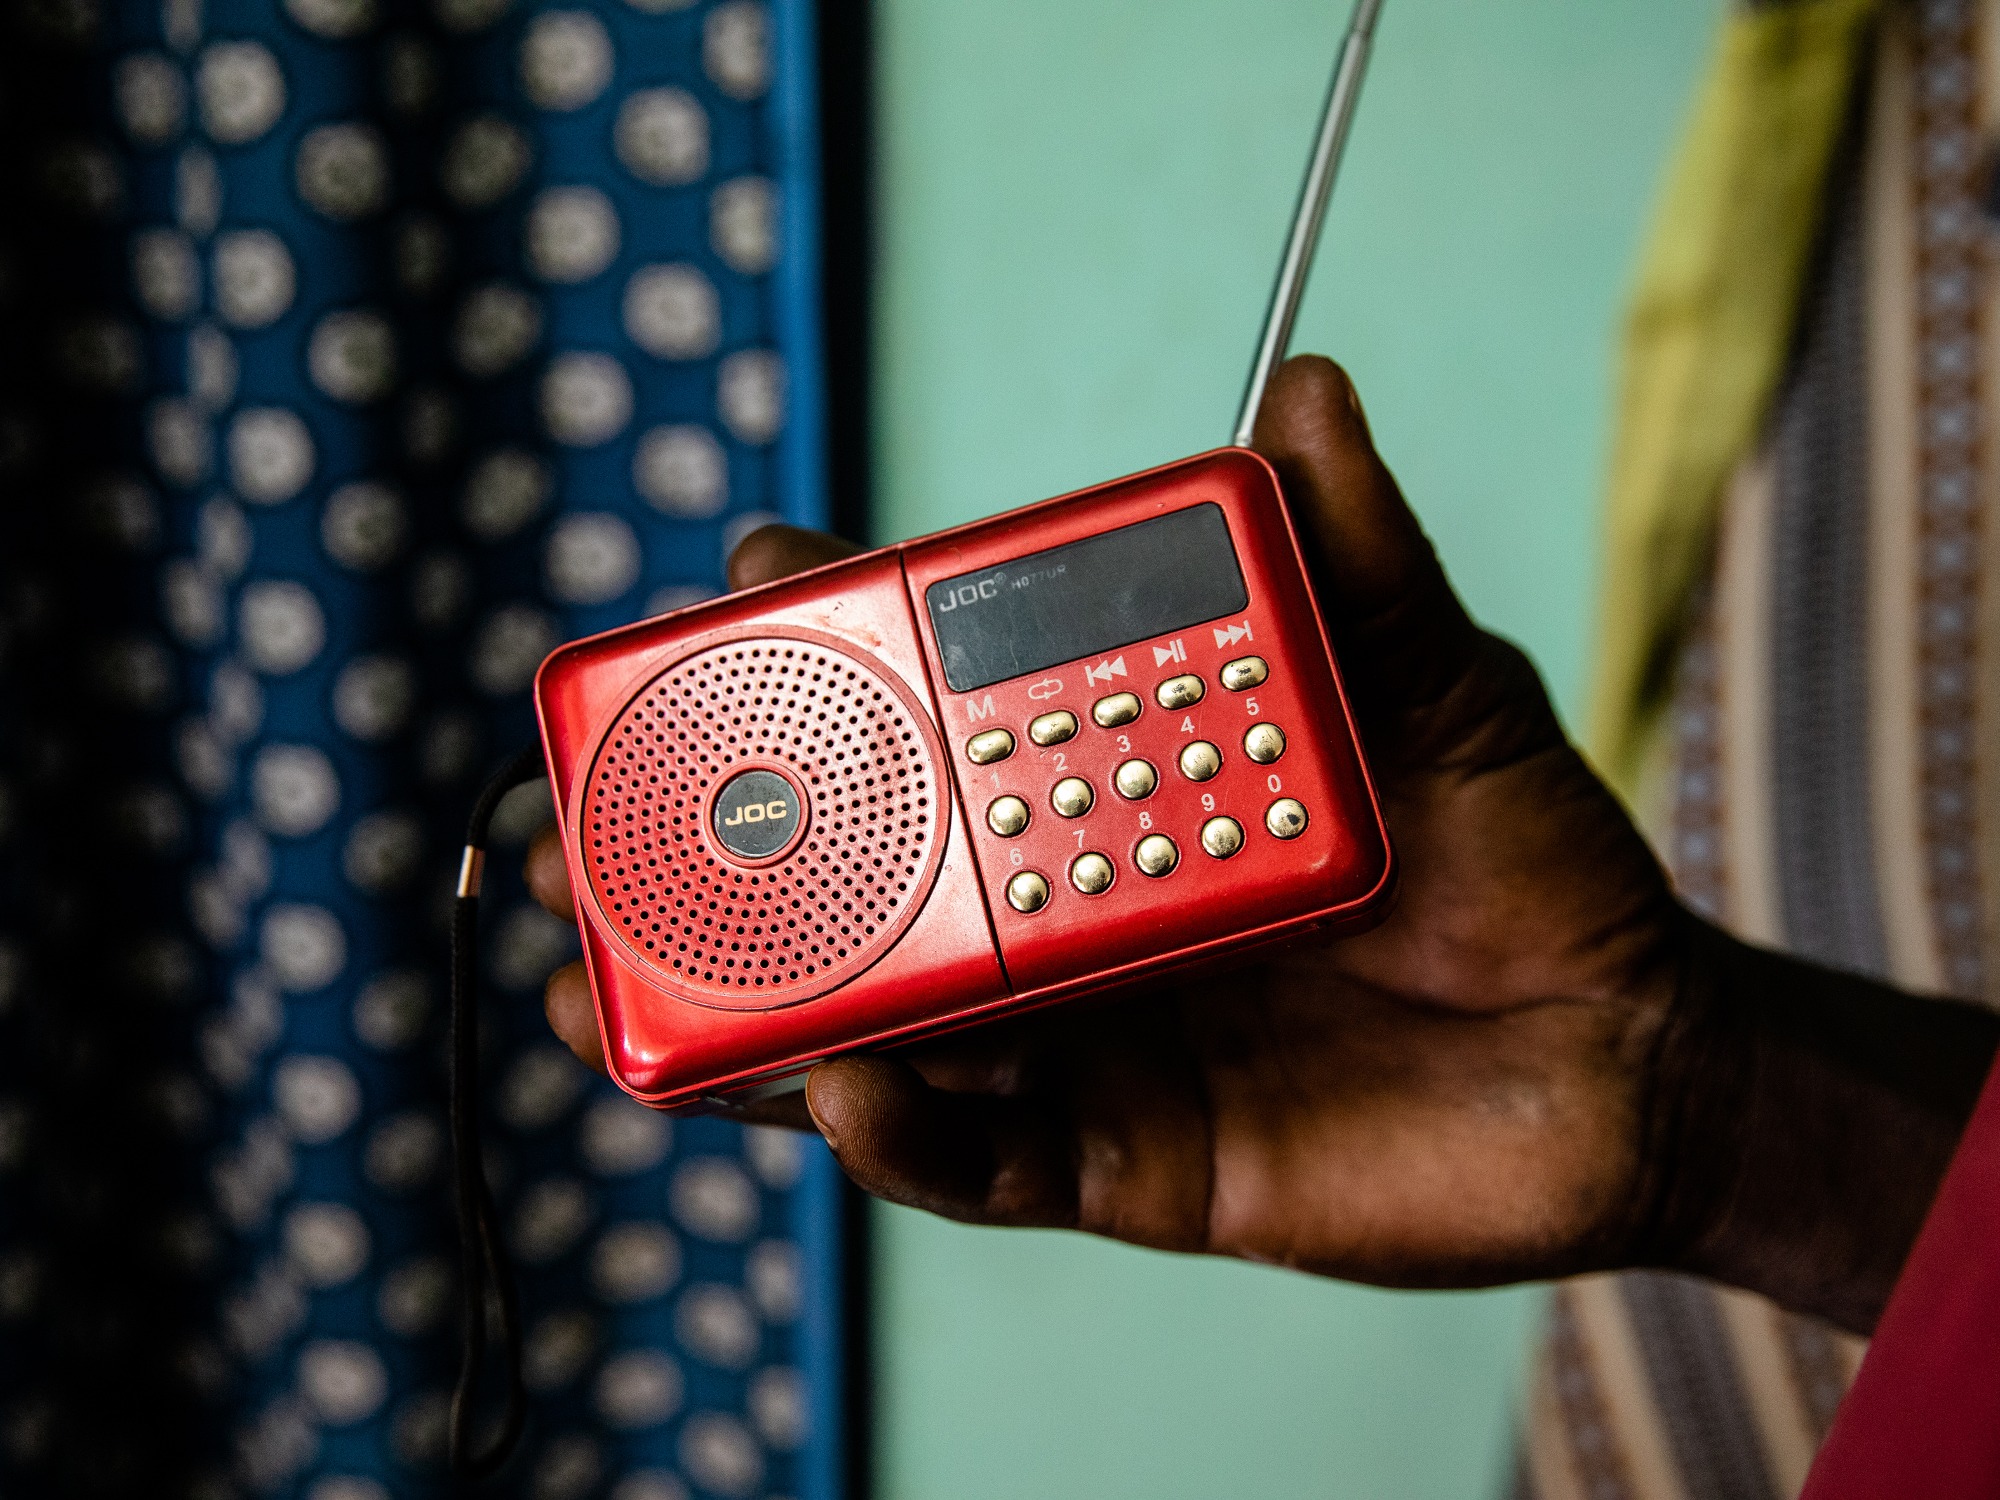 Man's hand holding red radio in front of turquoise wall and polka dot curtain